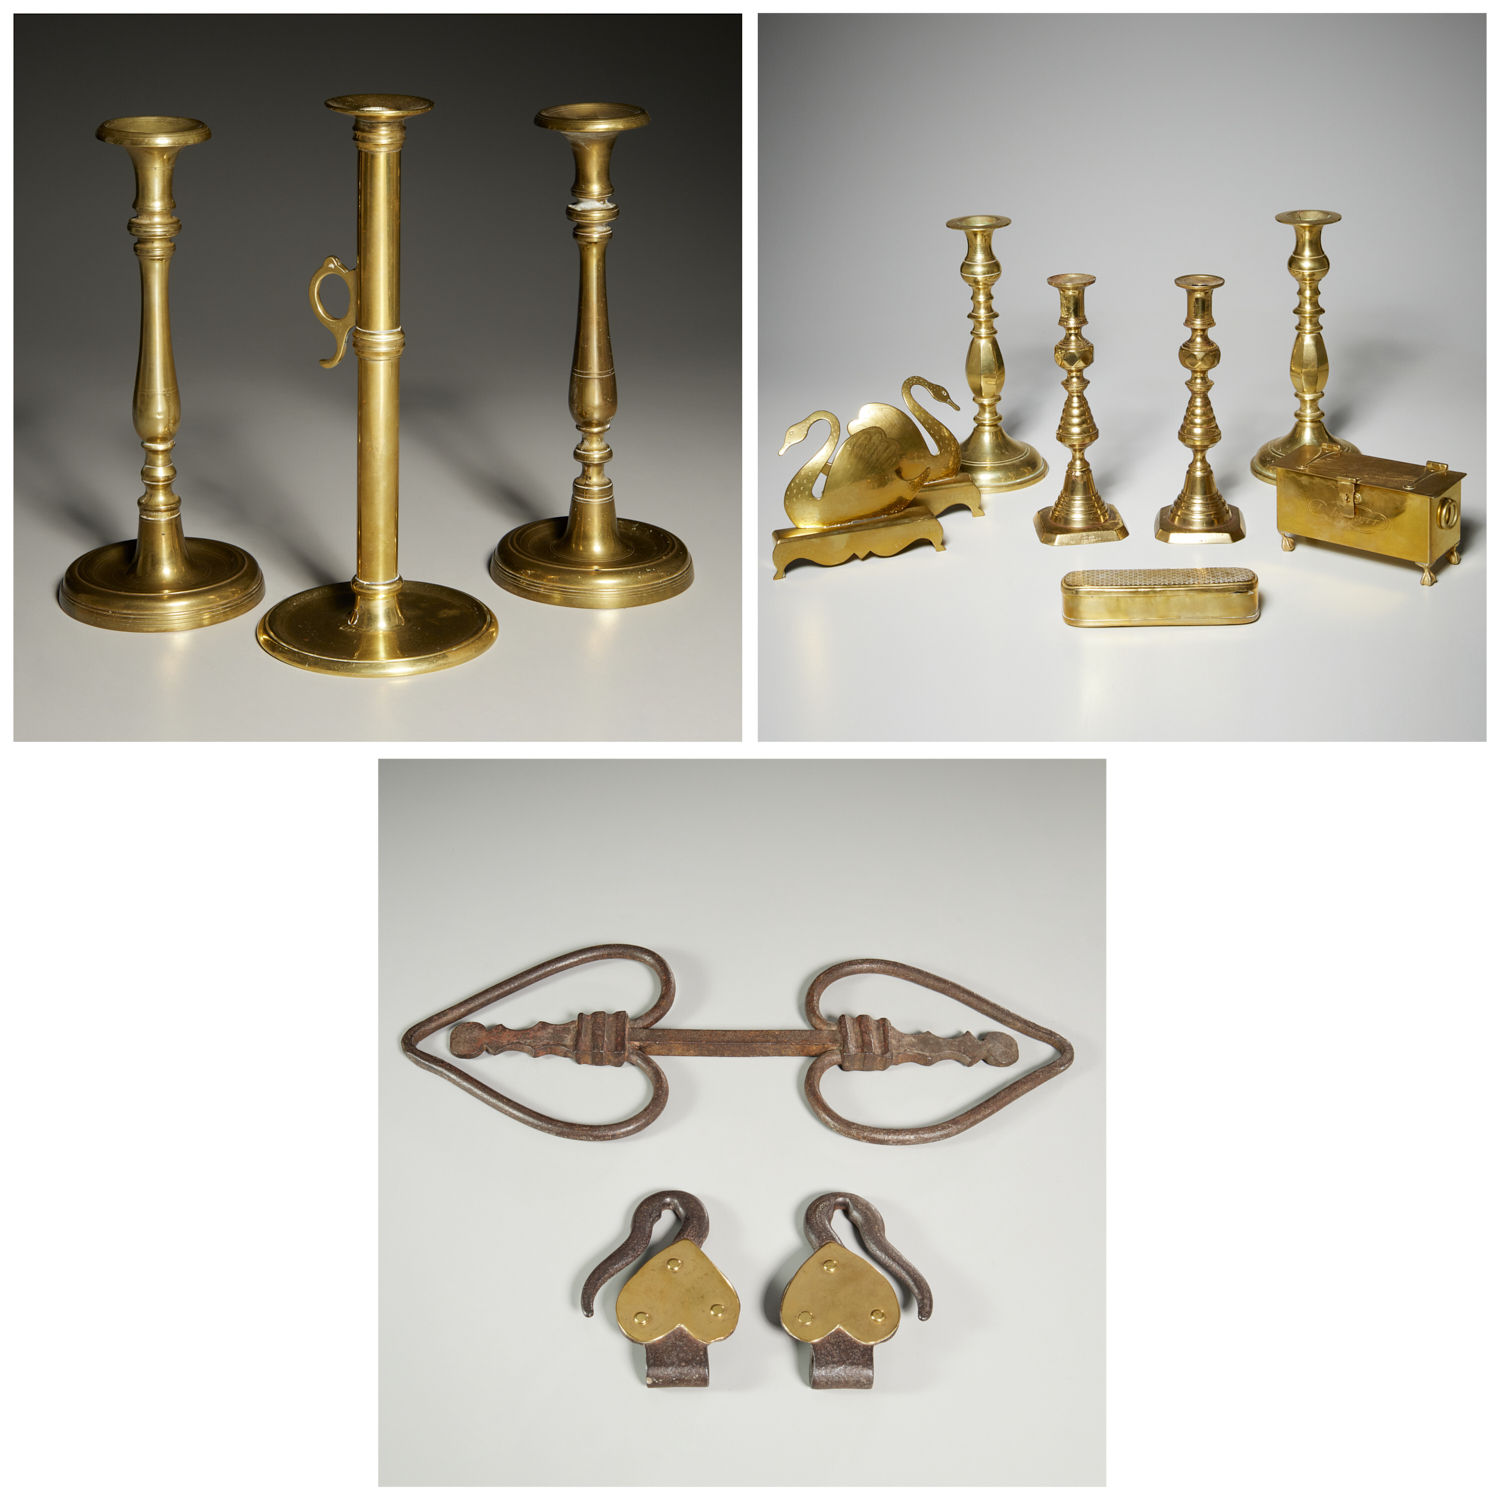 GROUP 14 ANTIQUE BRASS OBJECTS 361071